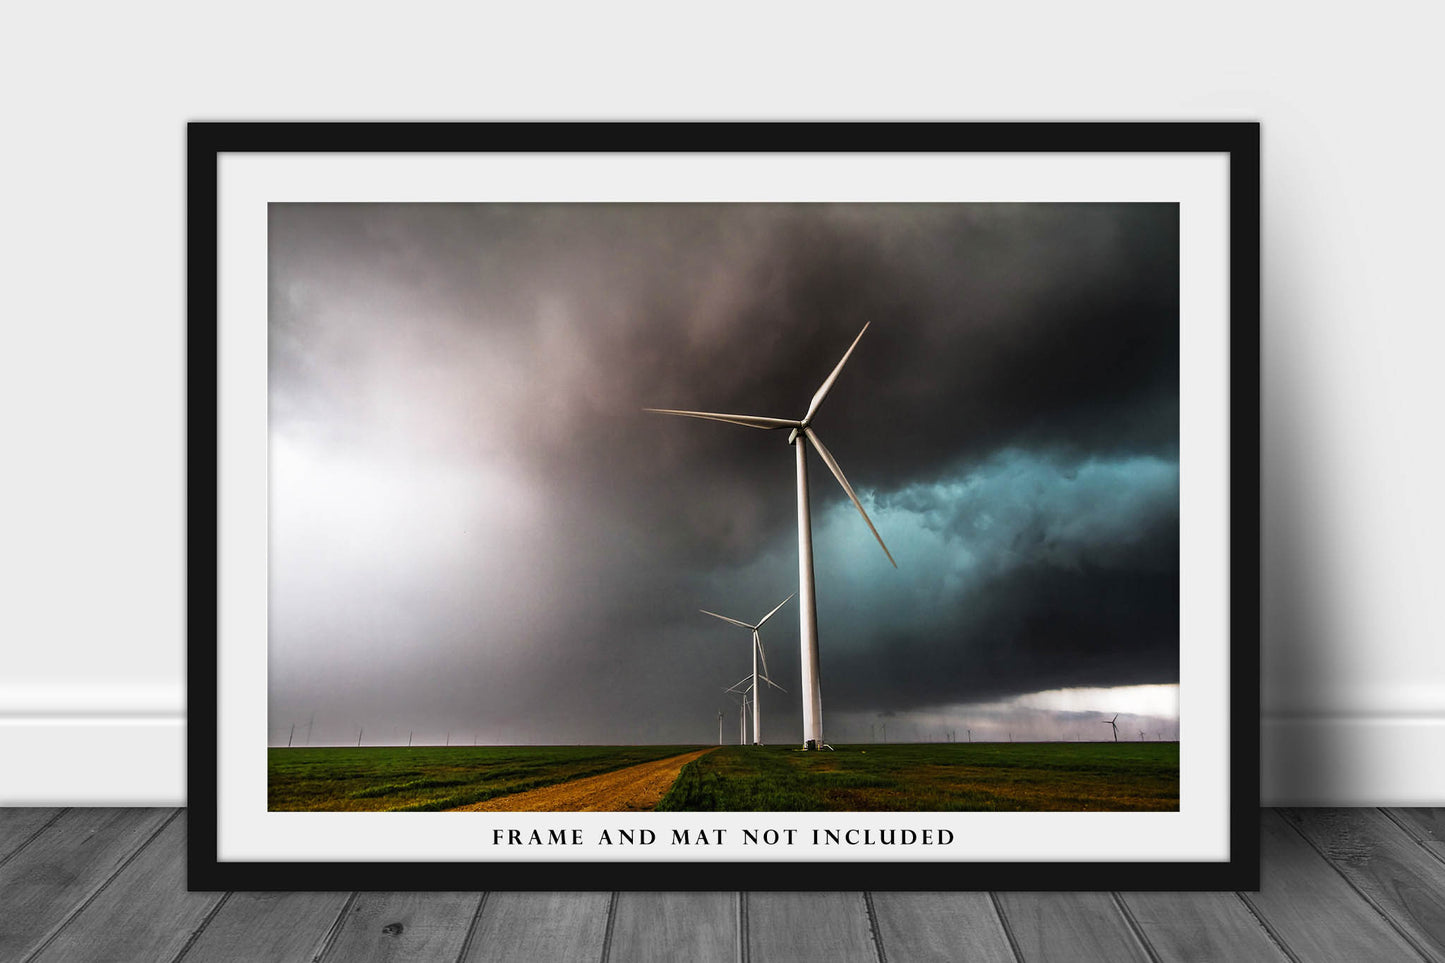 Wind Turbine Picture - Fine Art Photography Print of Wind Farm and Storm in Texas Panhandle Renewable Energy Wall Art Photo Decor